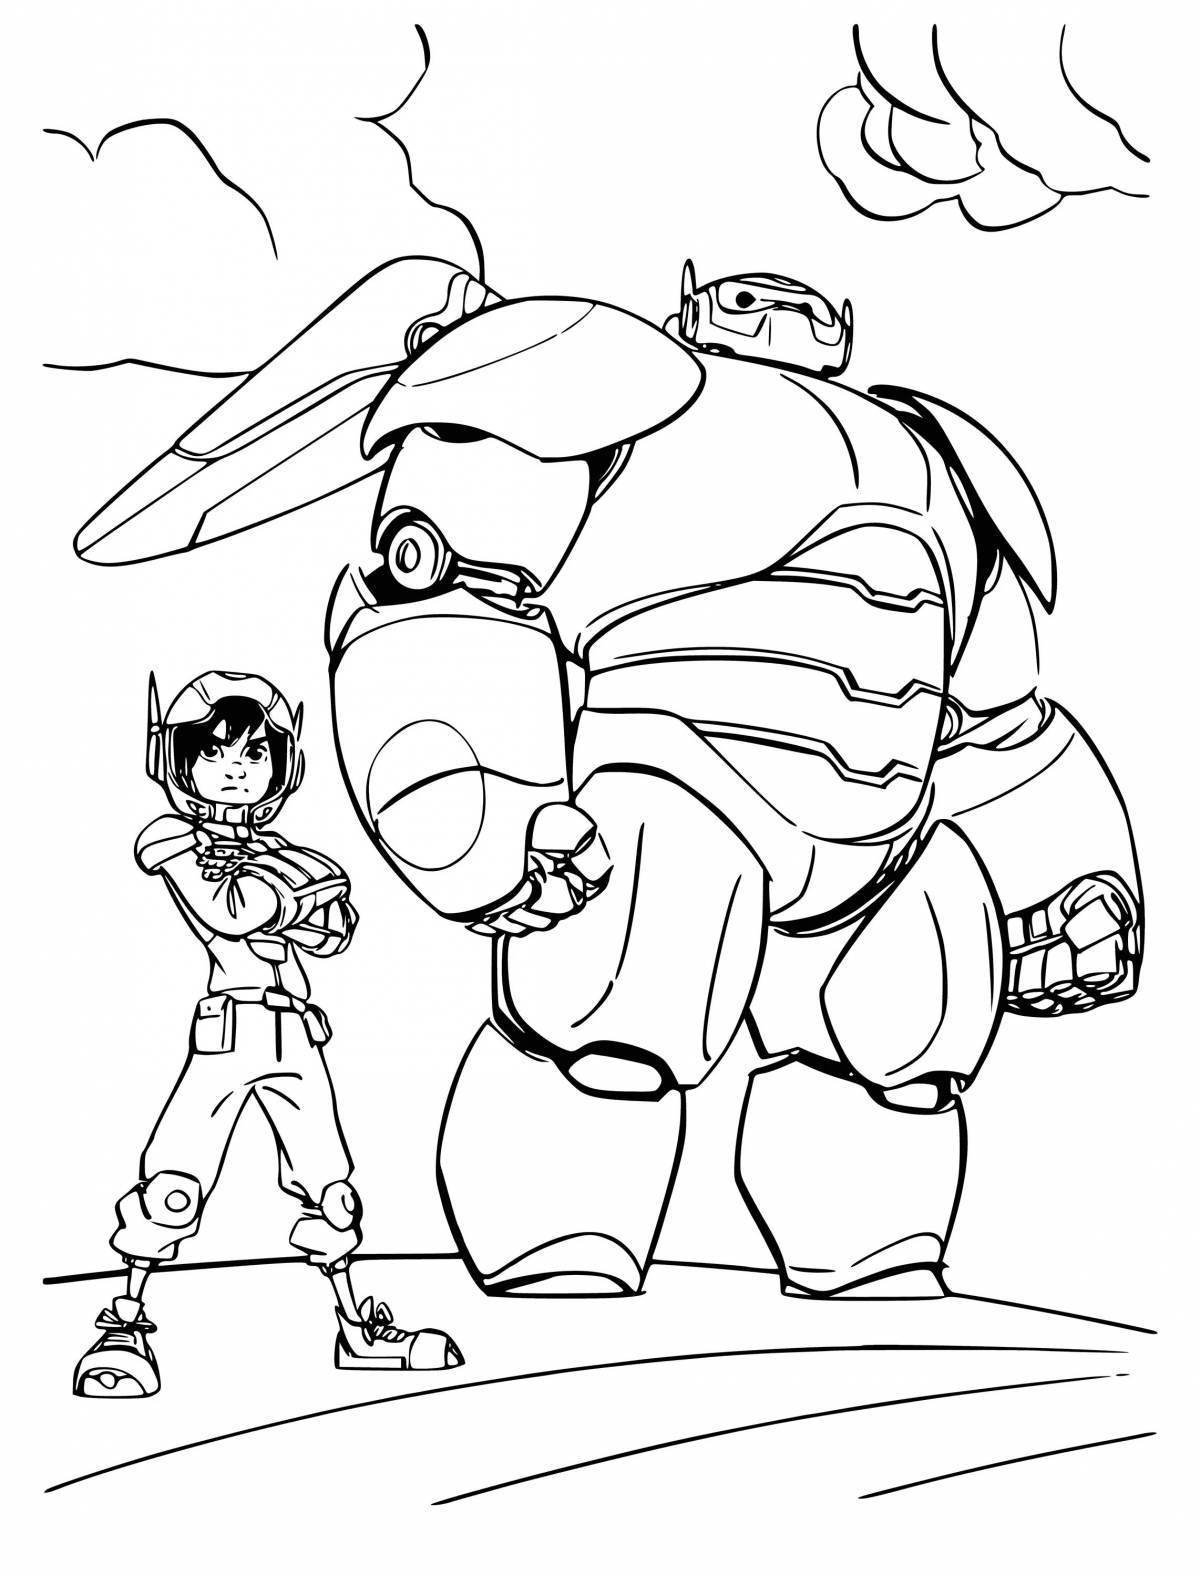 Awesome boys ozone coloring page